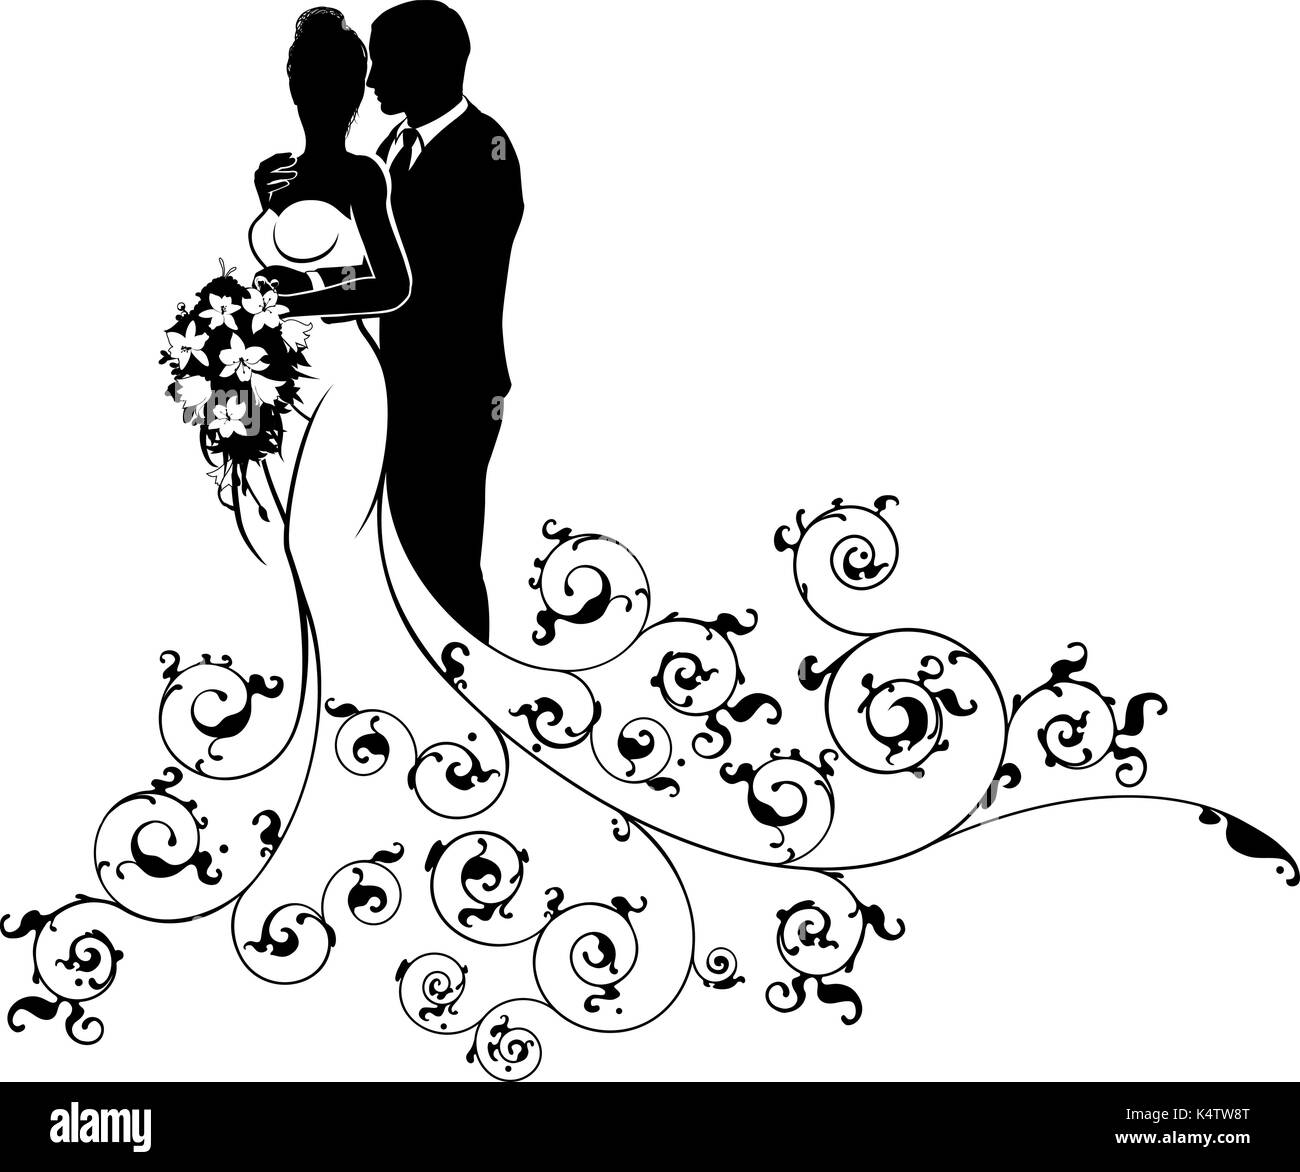 Bride and Groom Wedding Concept Silhouette Stock Vector